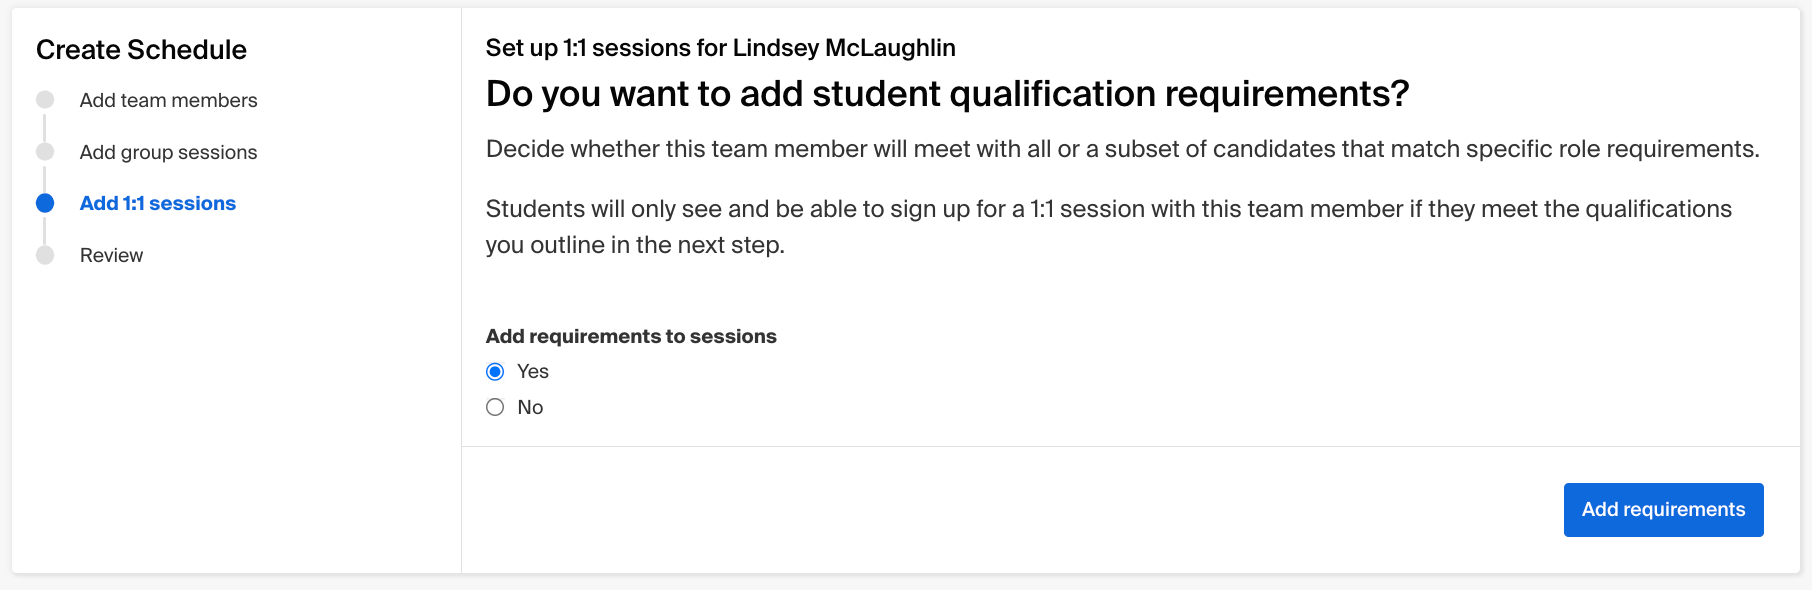 Do_you_want_to_add_student_qualification_requirements.png